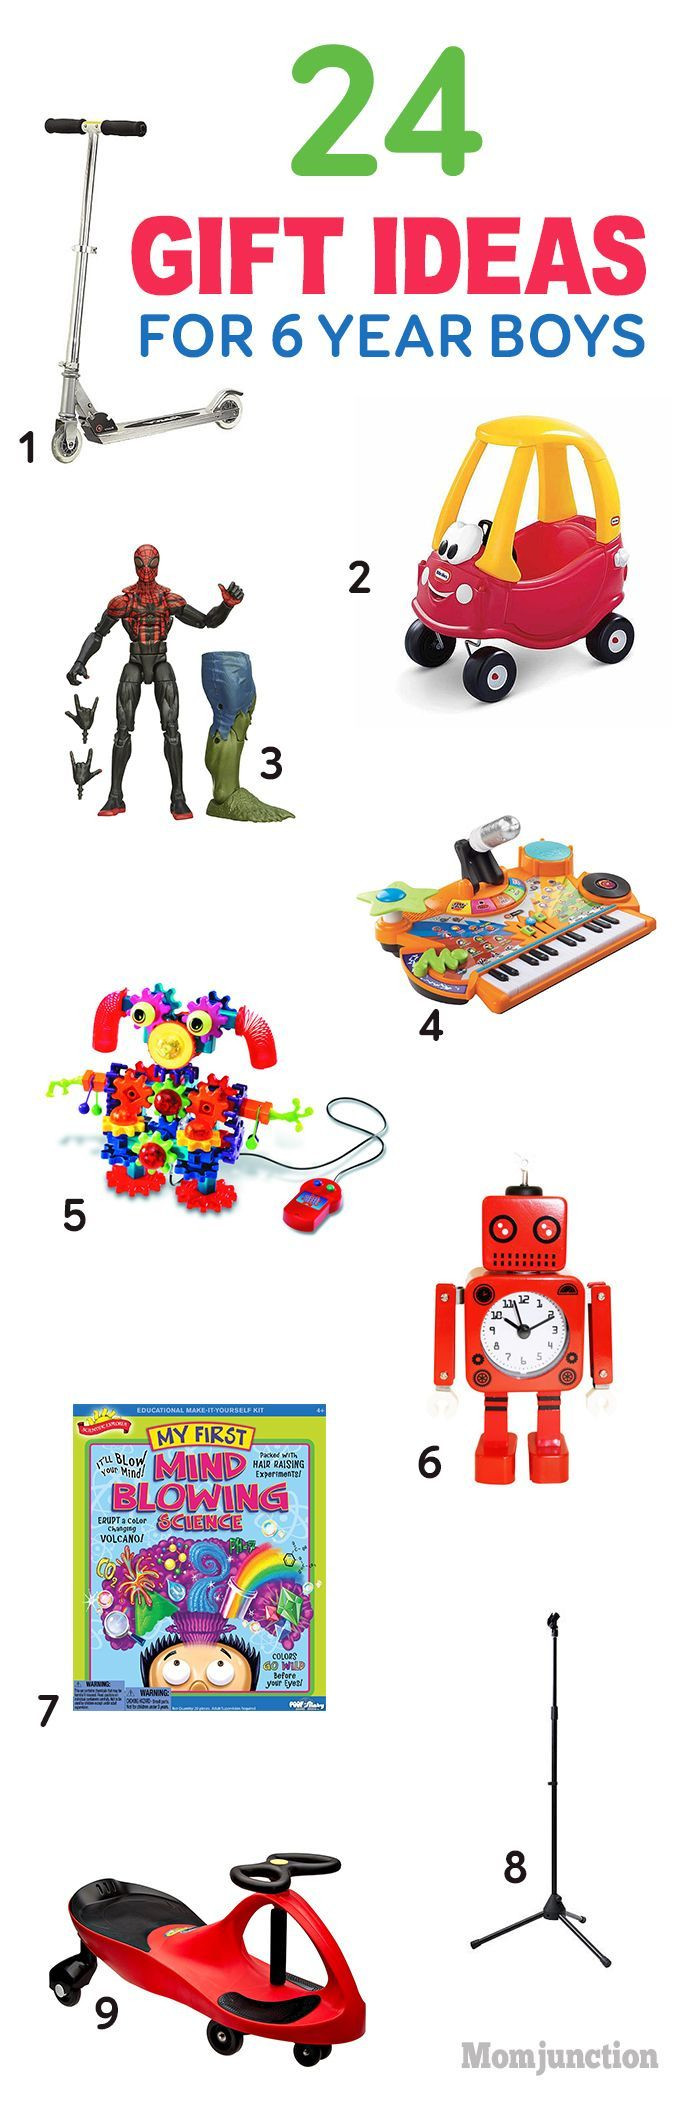 Gift Ideas For Boys Age 6
 17 Best images about Toys for 7 year old boy on Pinterest